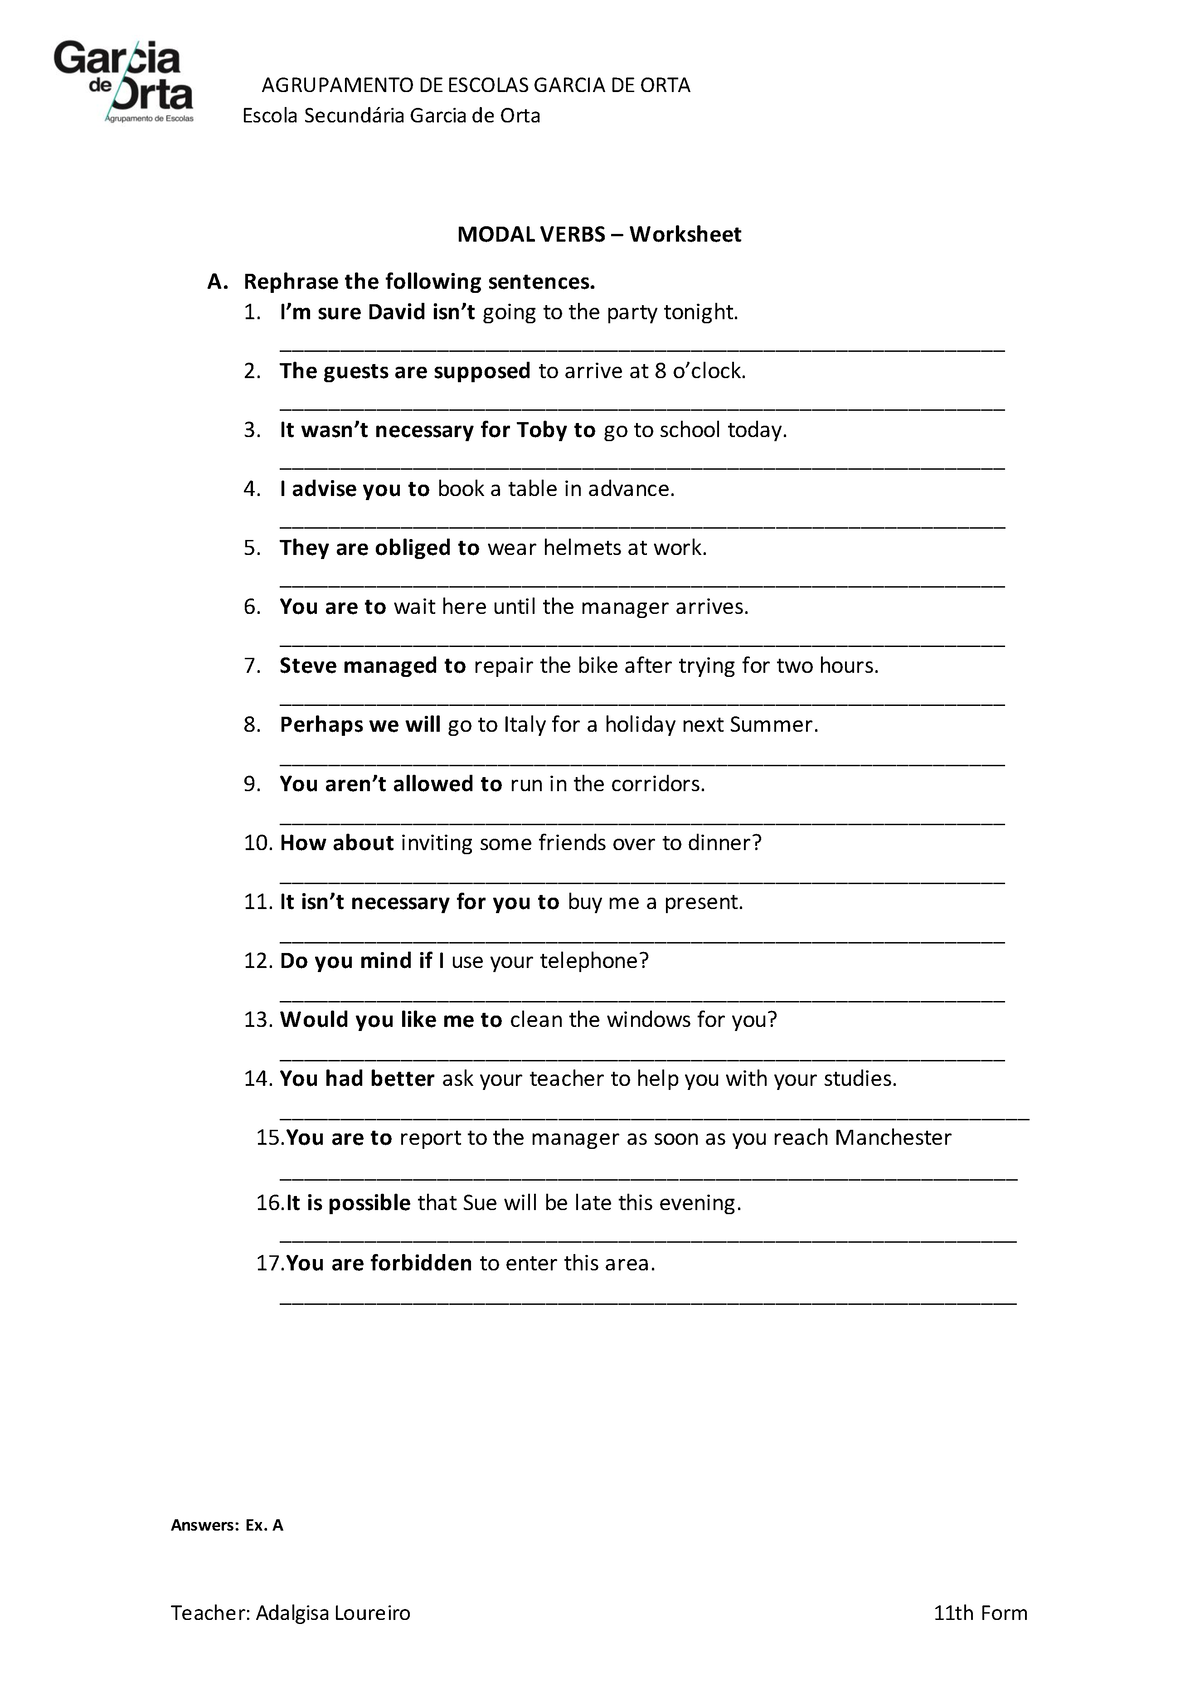 Modal Verbs Worksheet With Answers Grade 8